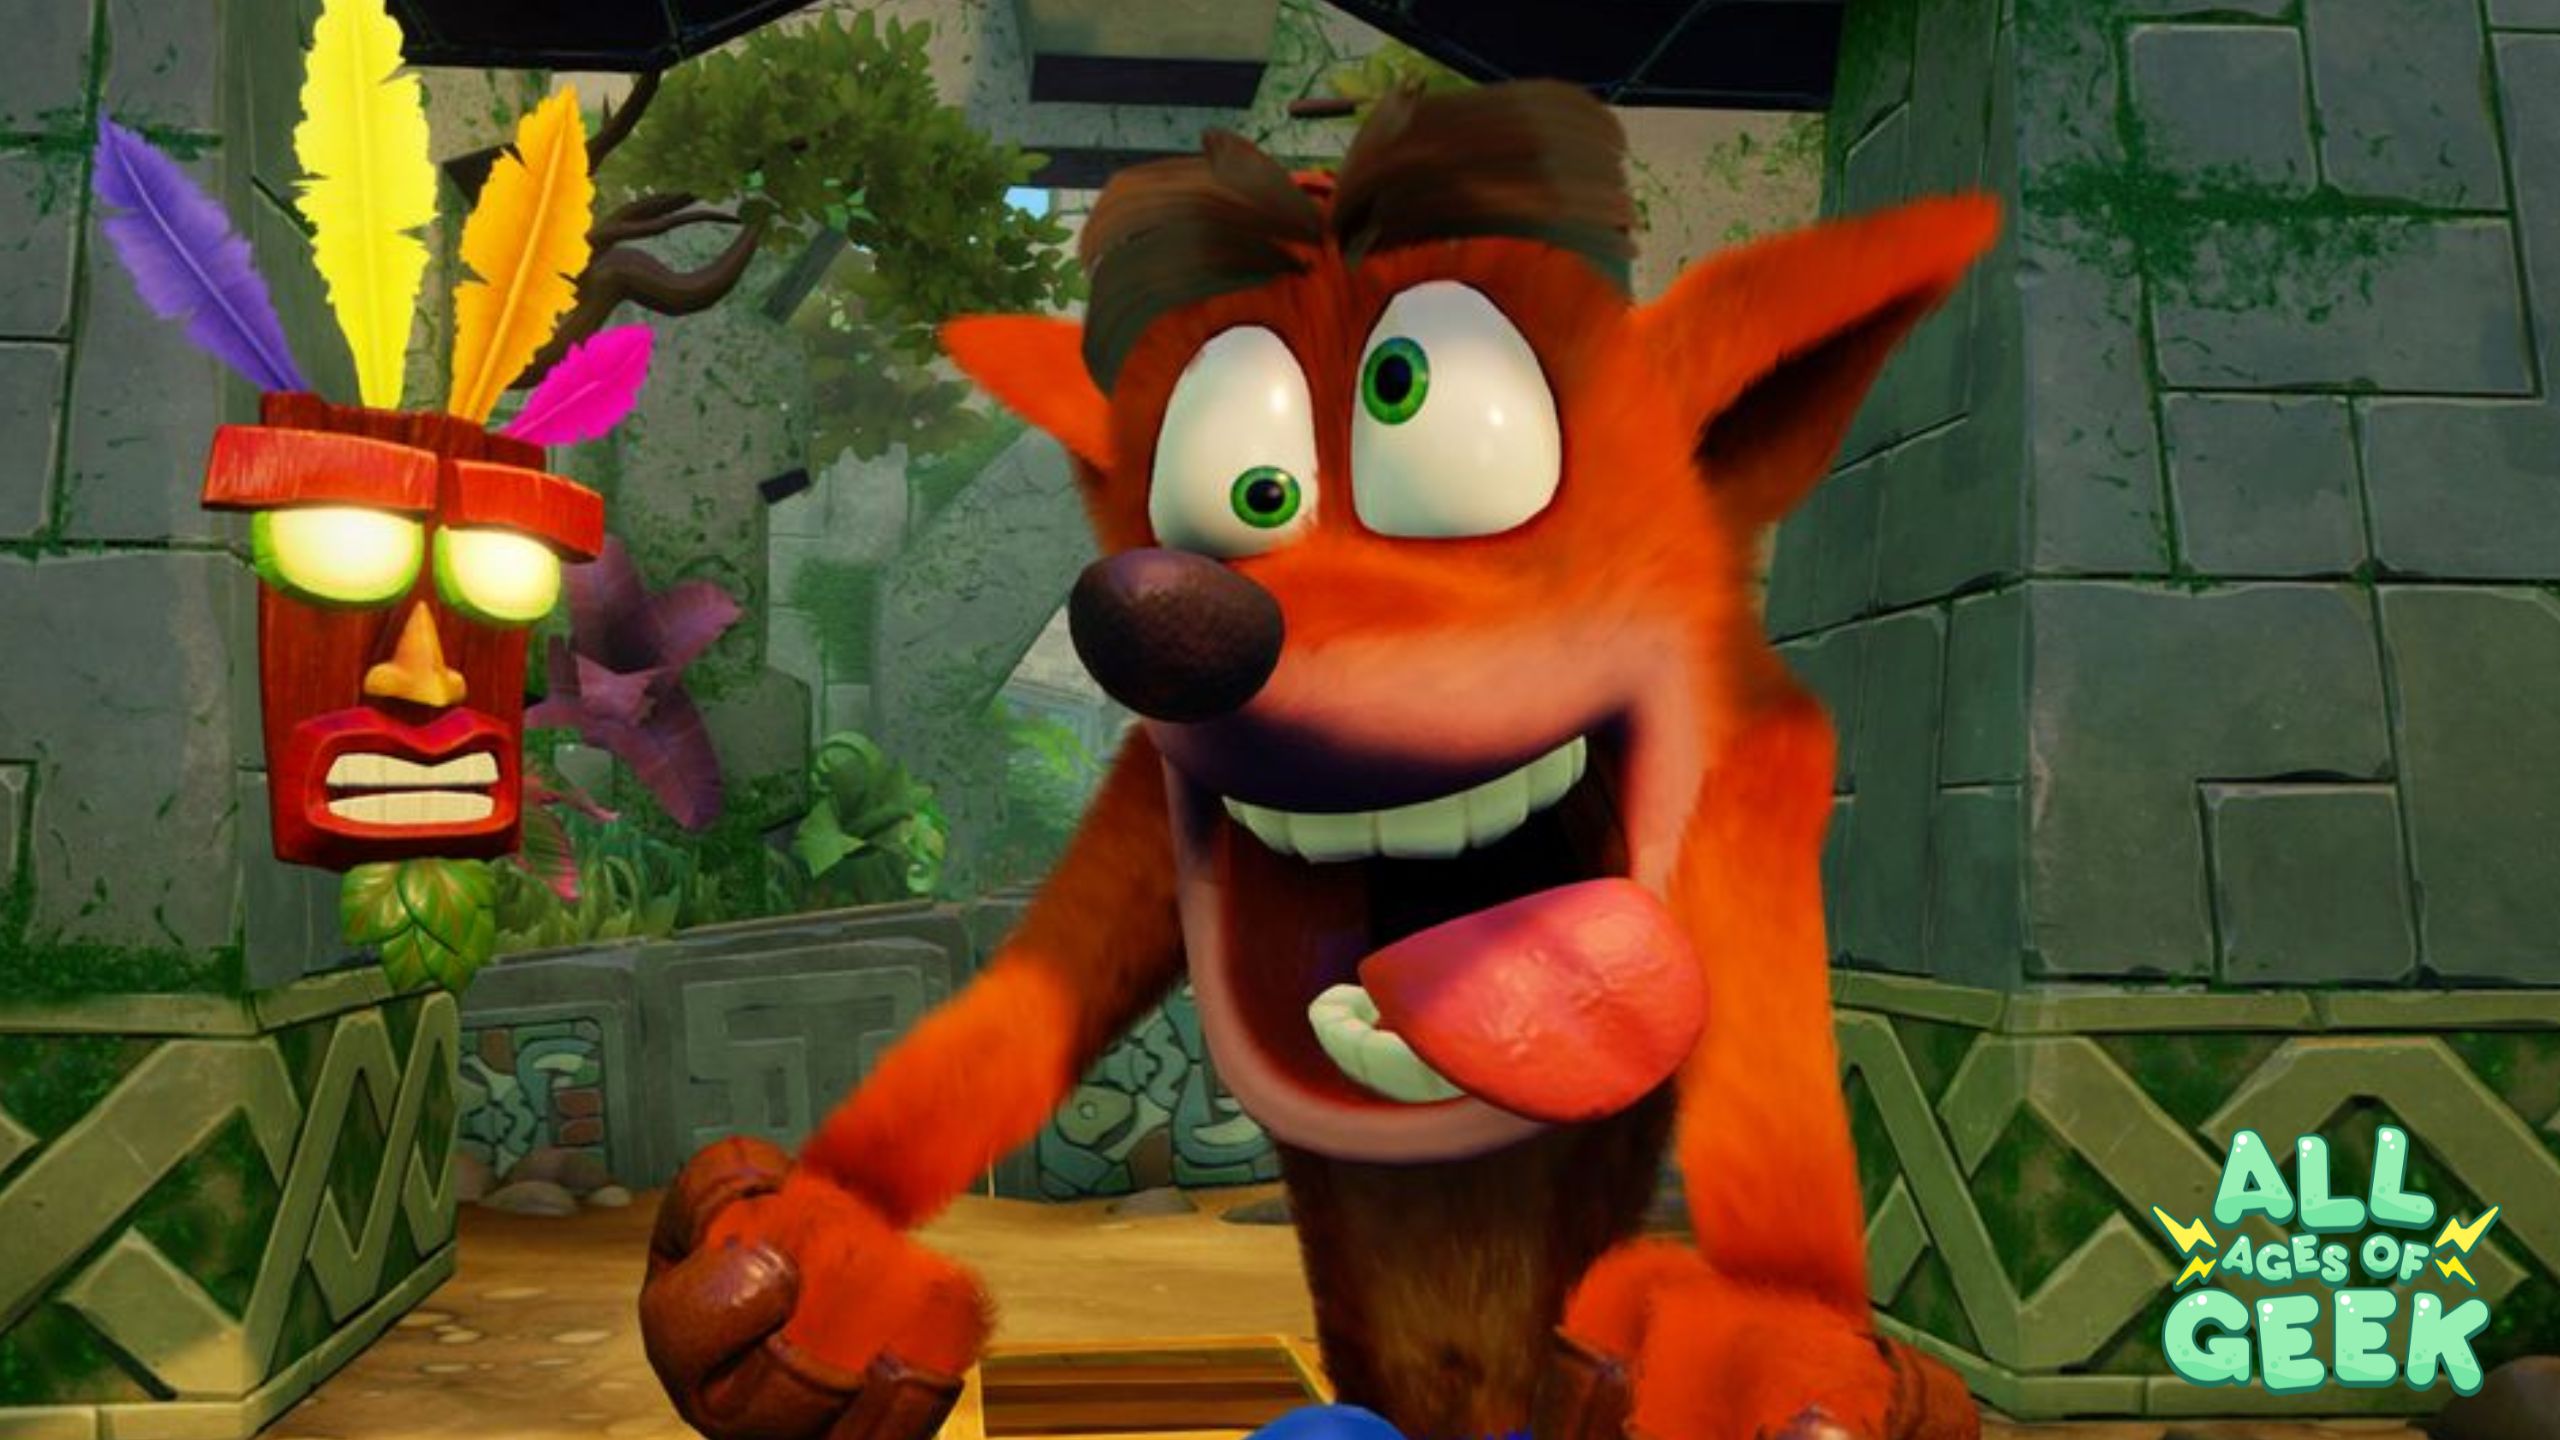 Which “Crash Bandicoot” Character Are You? Take the Quiz to Find Out!